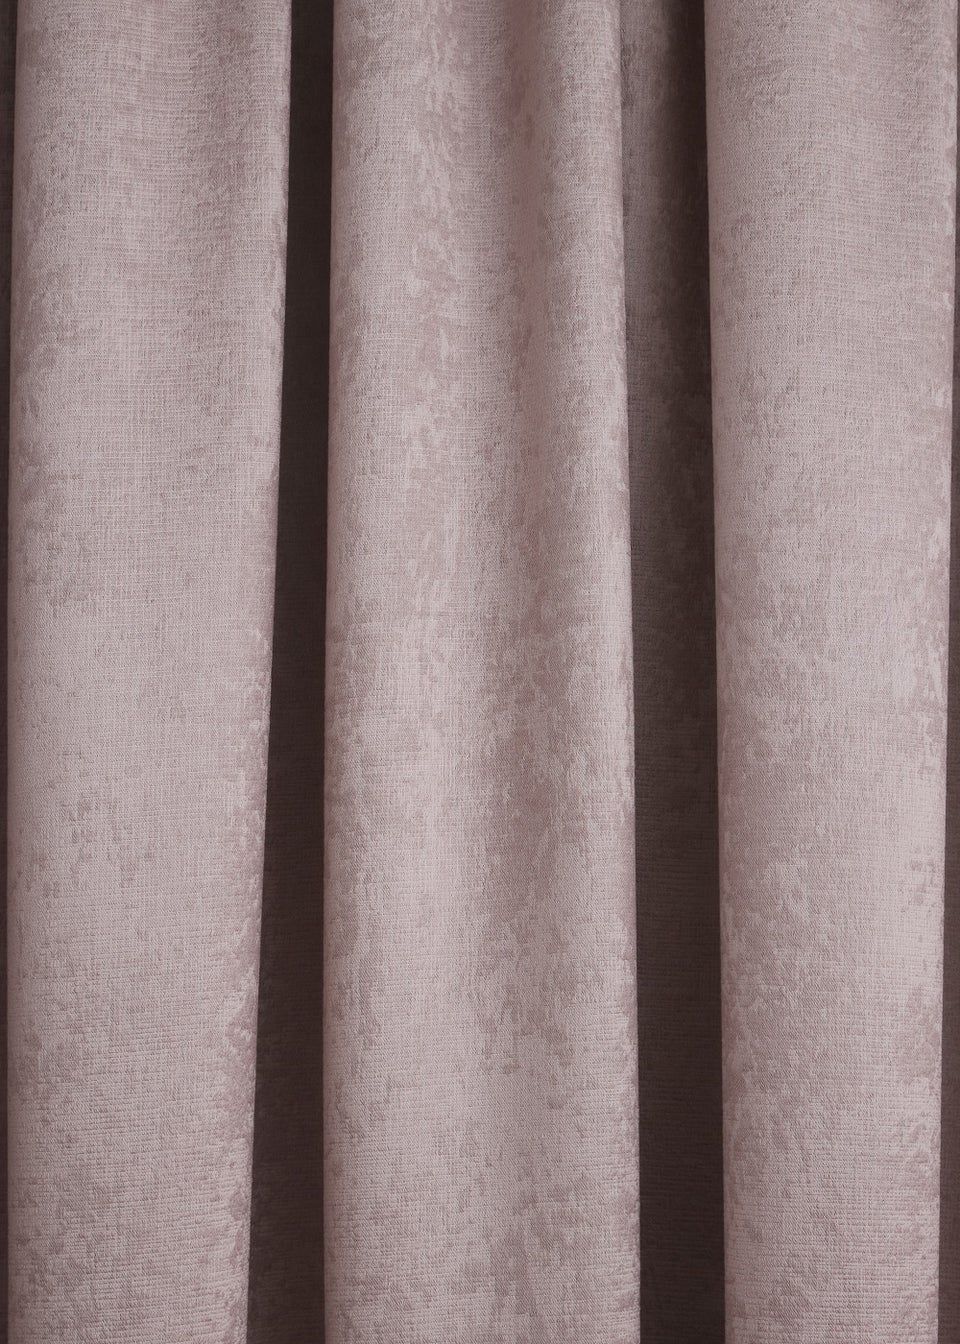 Fusion Galaxy Pair of Pencil Pleat Curtains